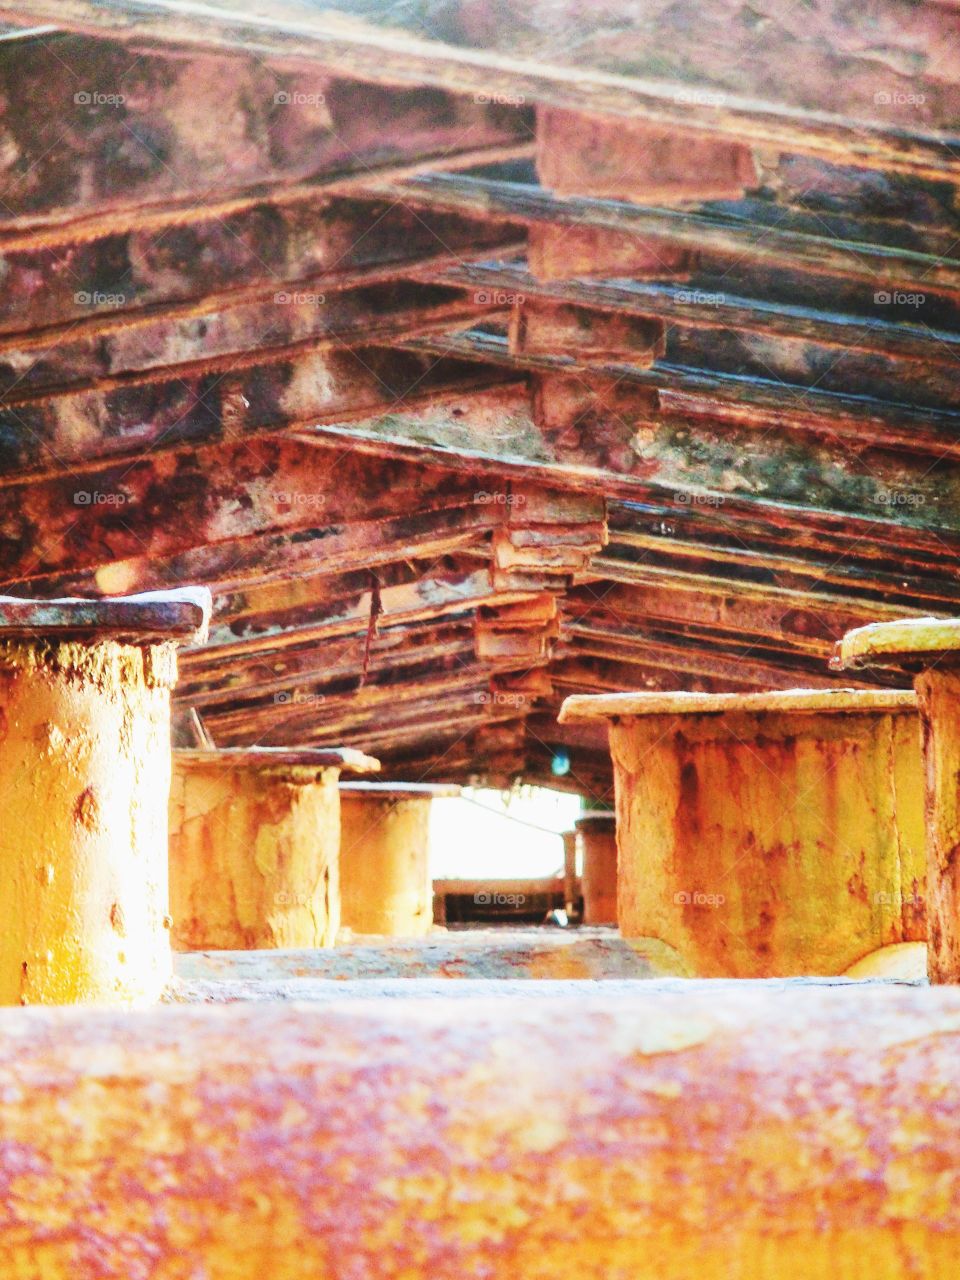 Rusty metal structures of the pier